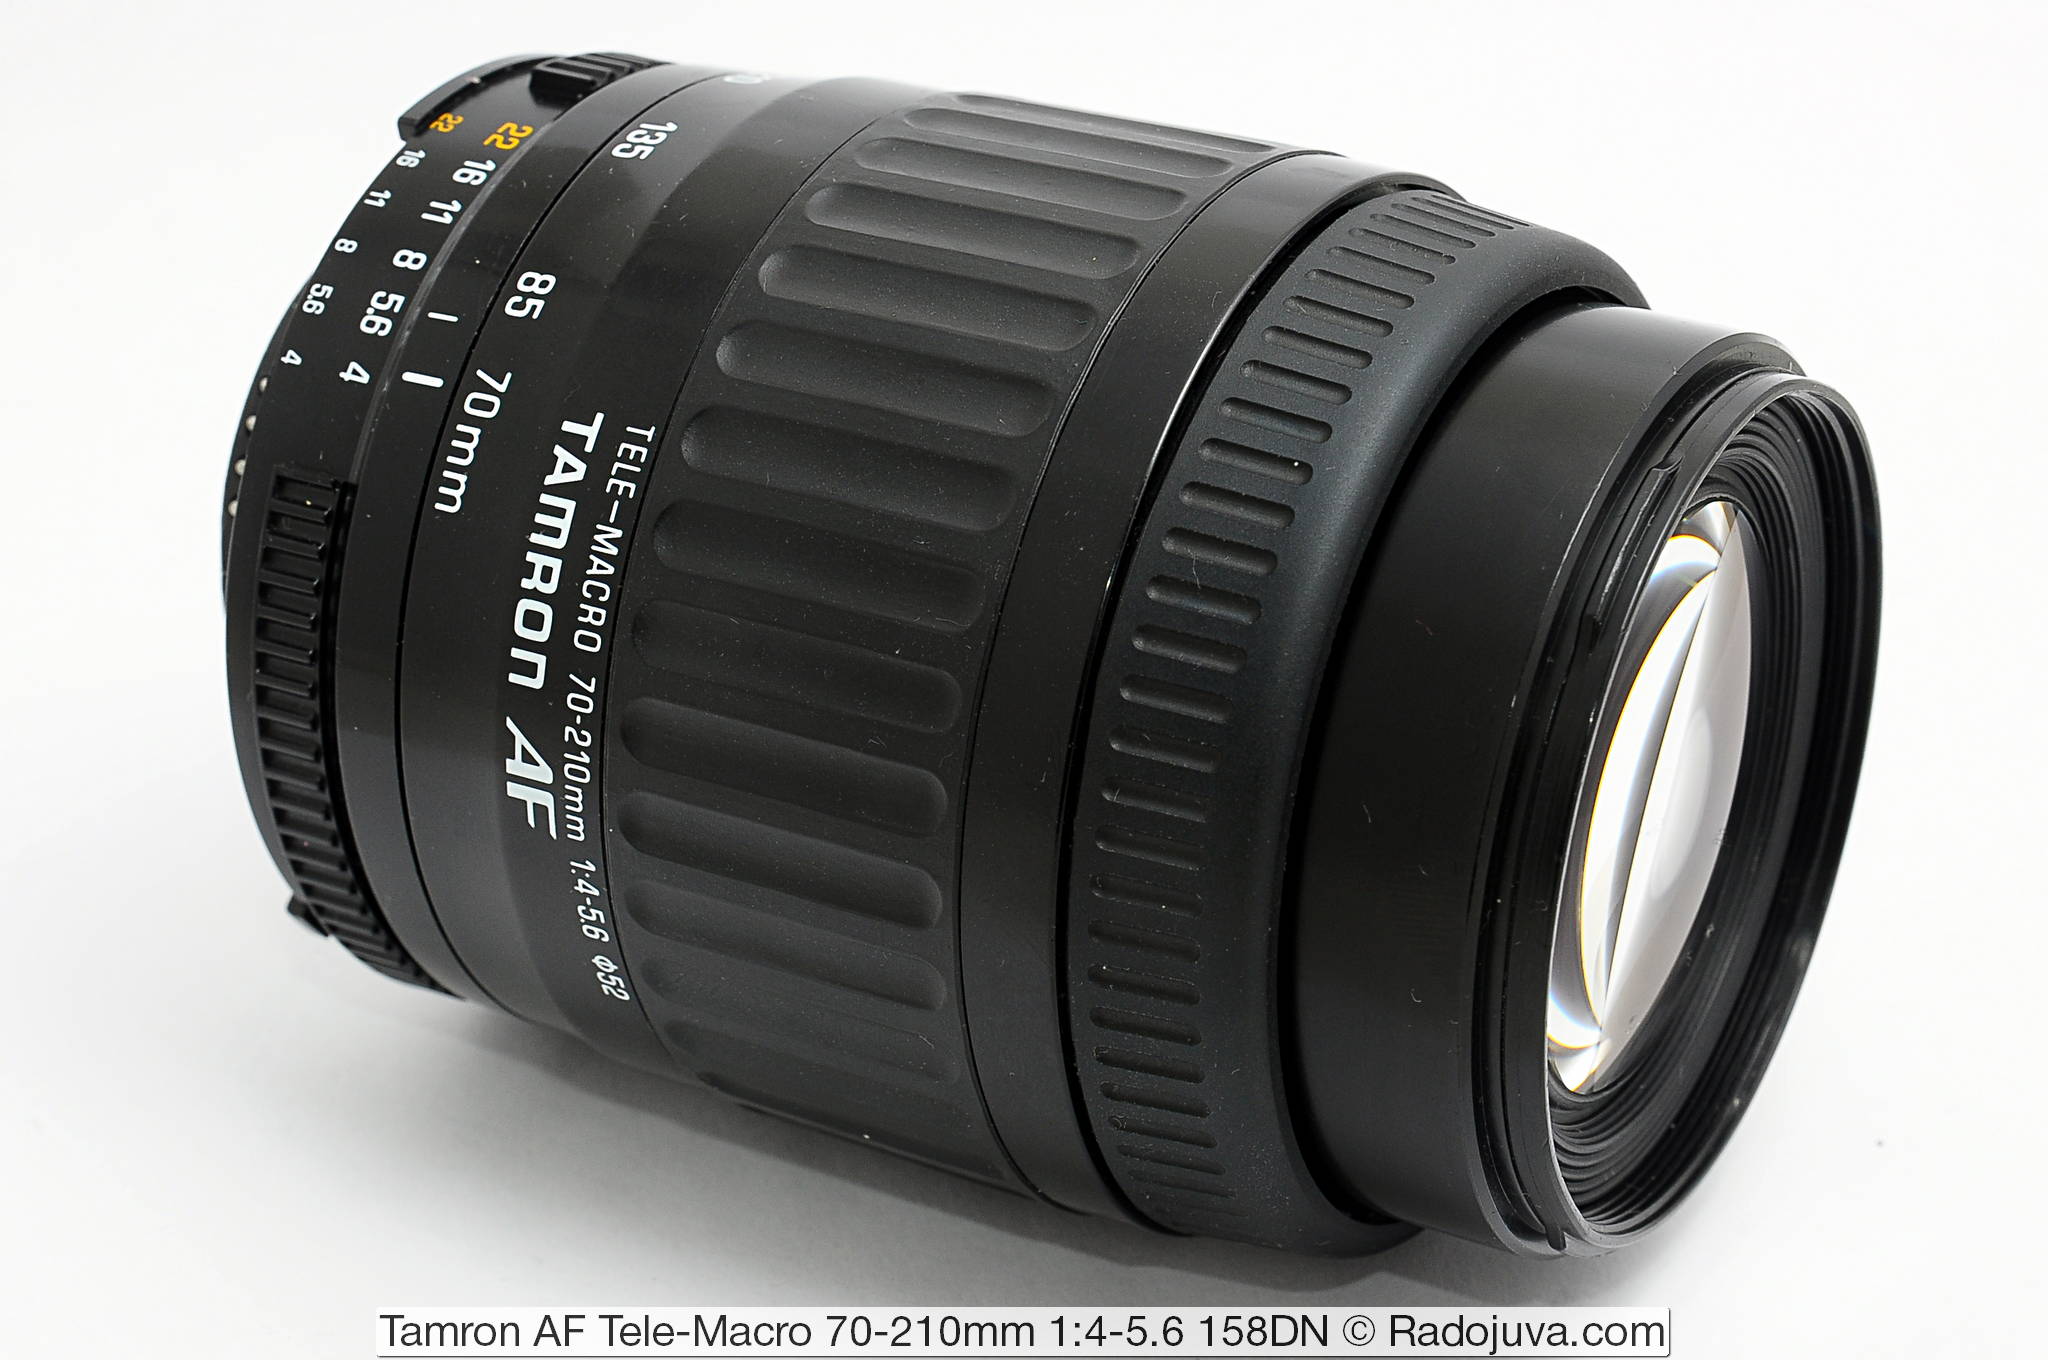 Review of Tamron AF Tele-Macro 70-210mm 1: 4-5.6 158DN | Happy